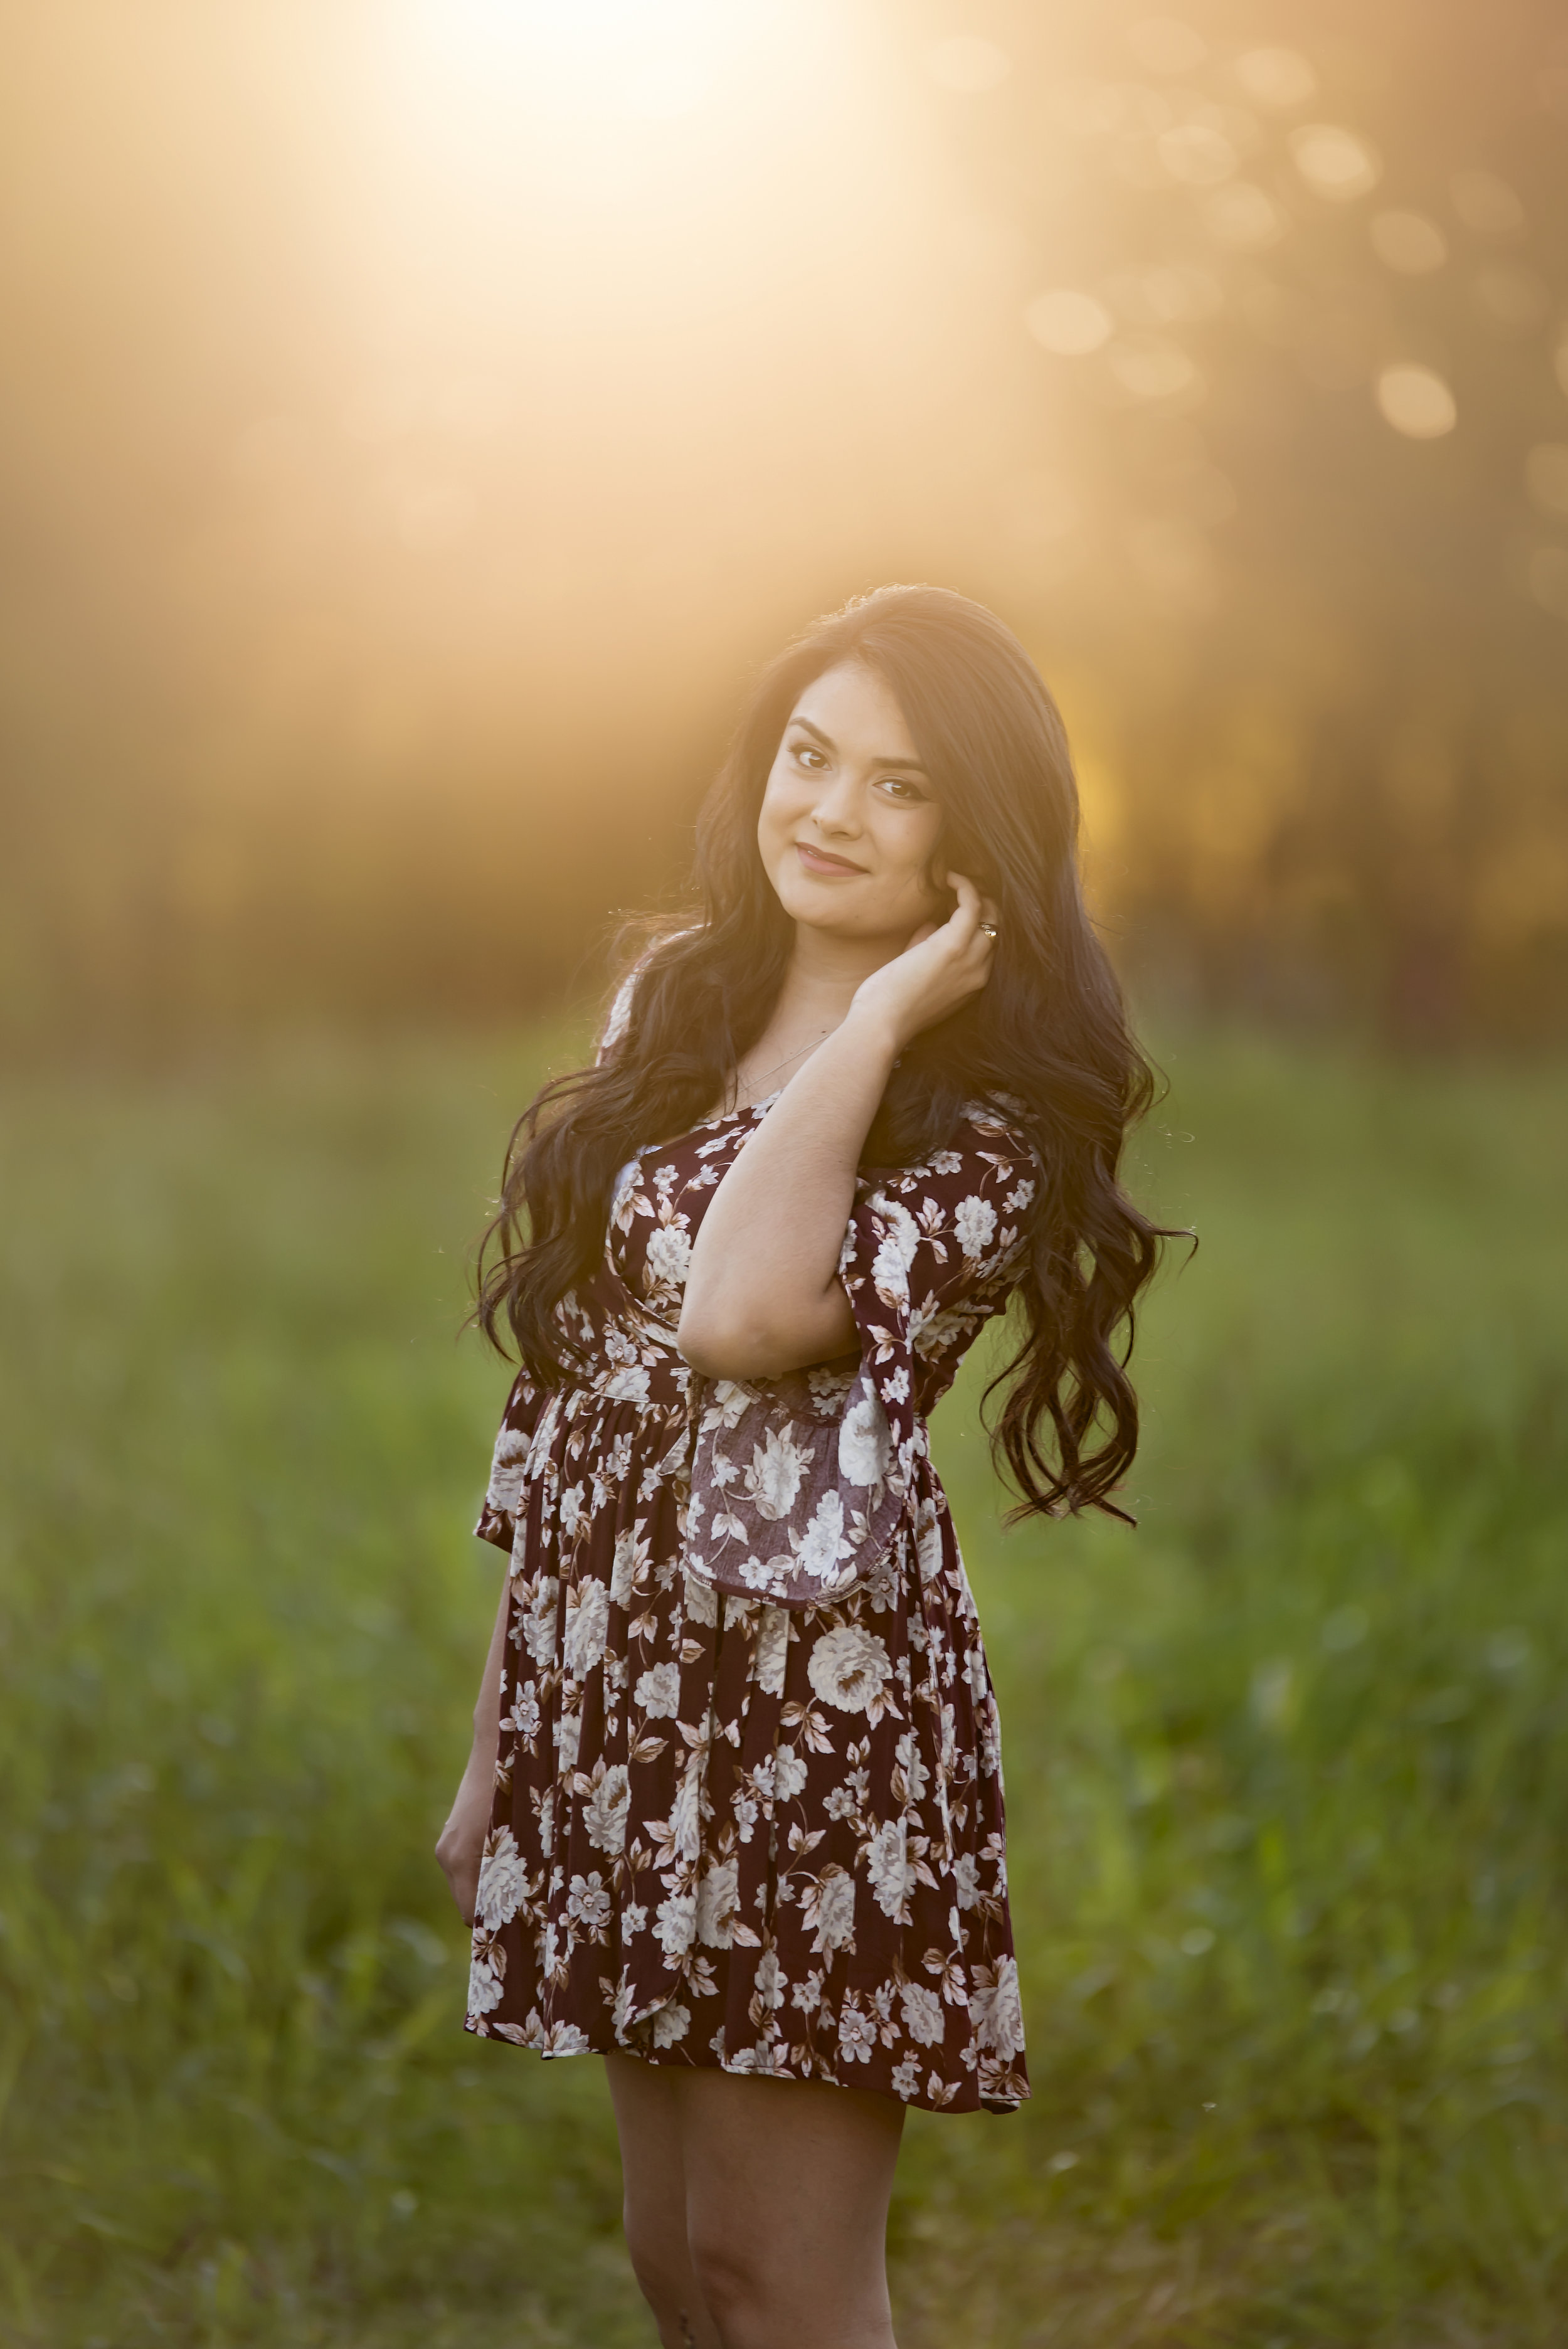  Senior heirloom portrait at sunset, girl standing in a field in a floral dress, facing the camera. 